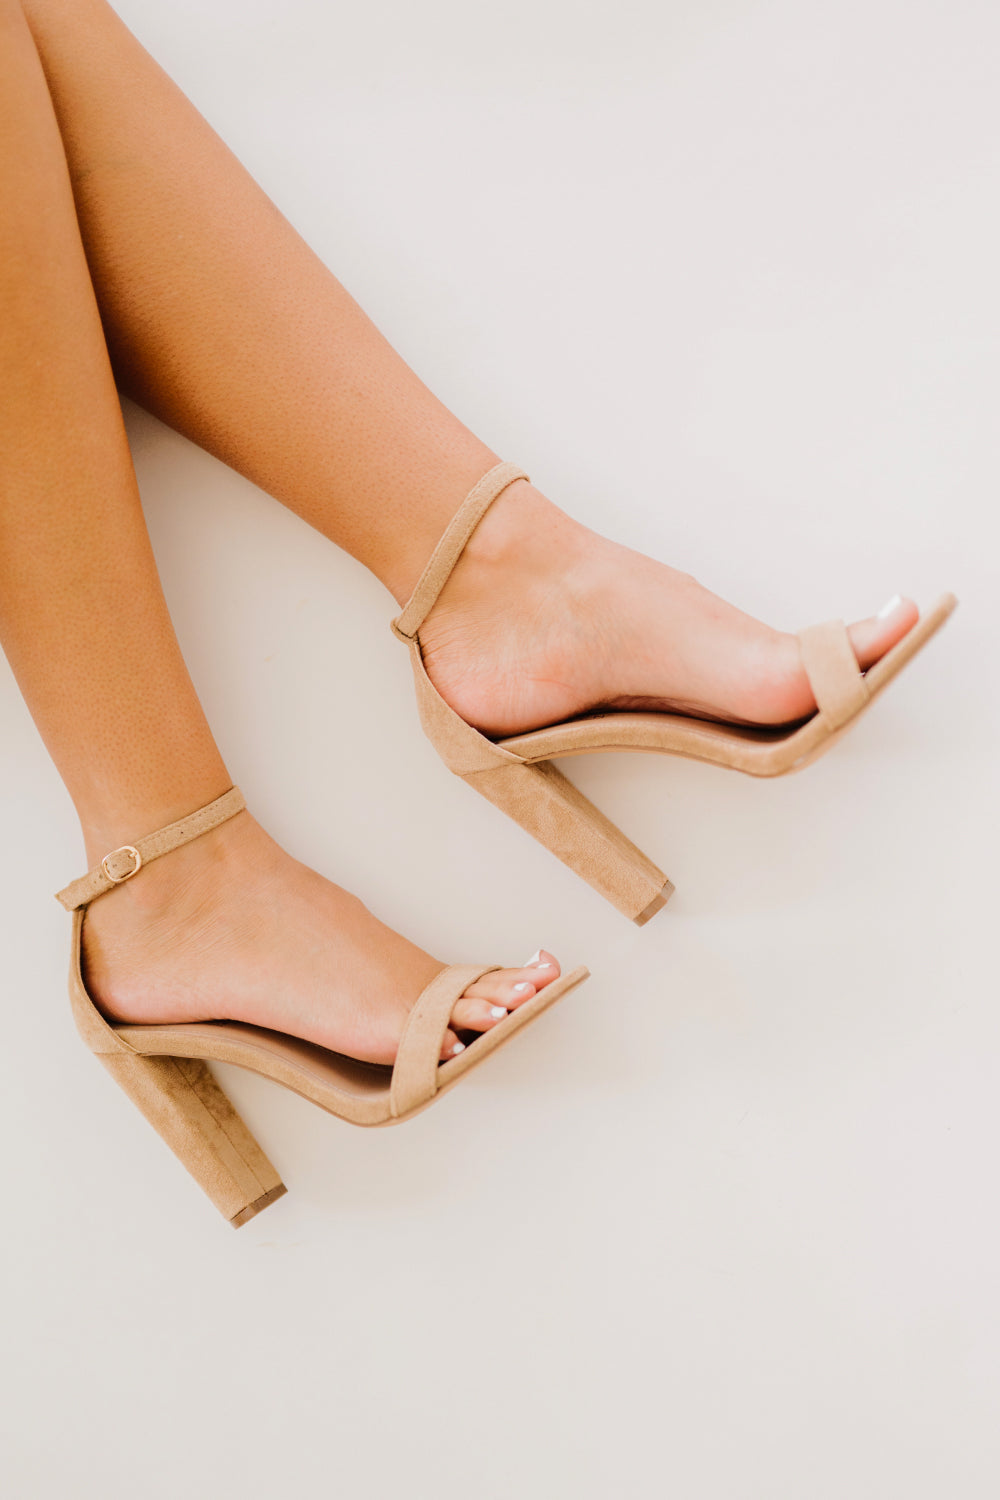 Standing Tall Square Toe Block Heel Sandals in Taupe